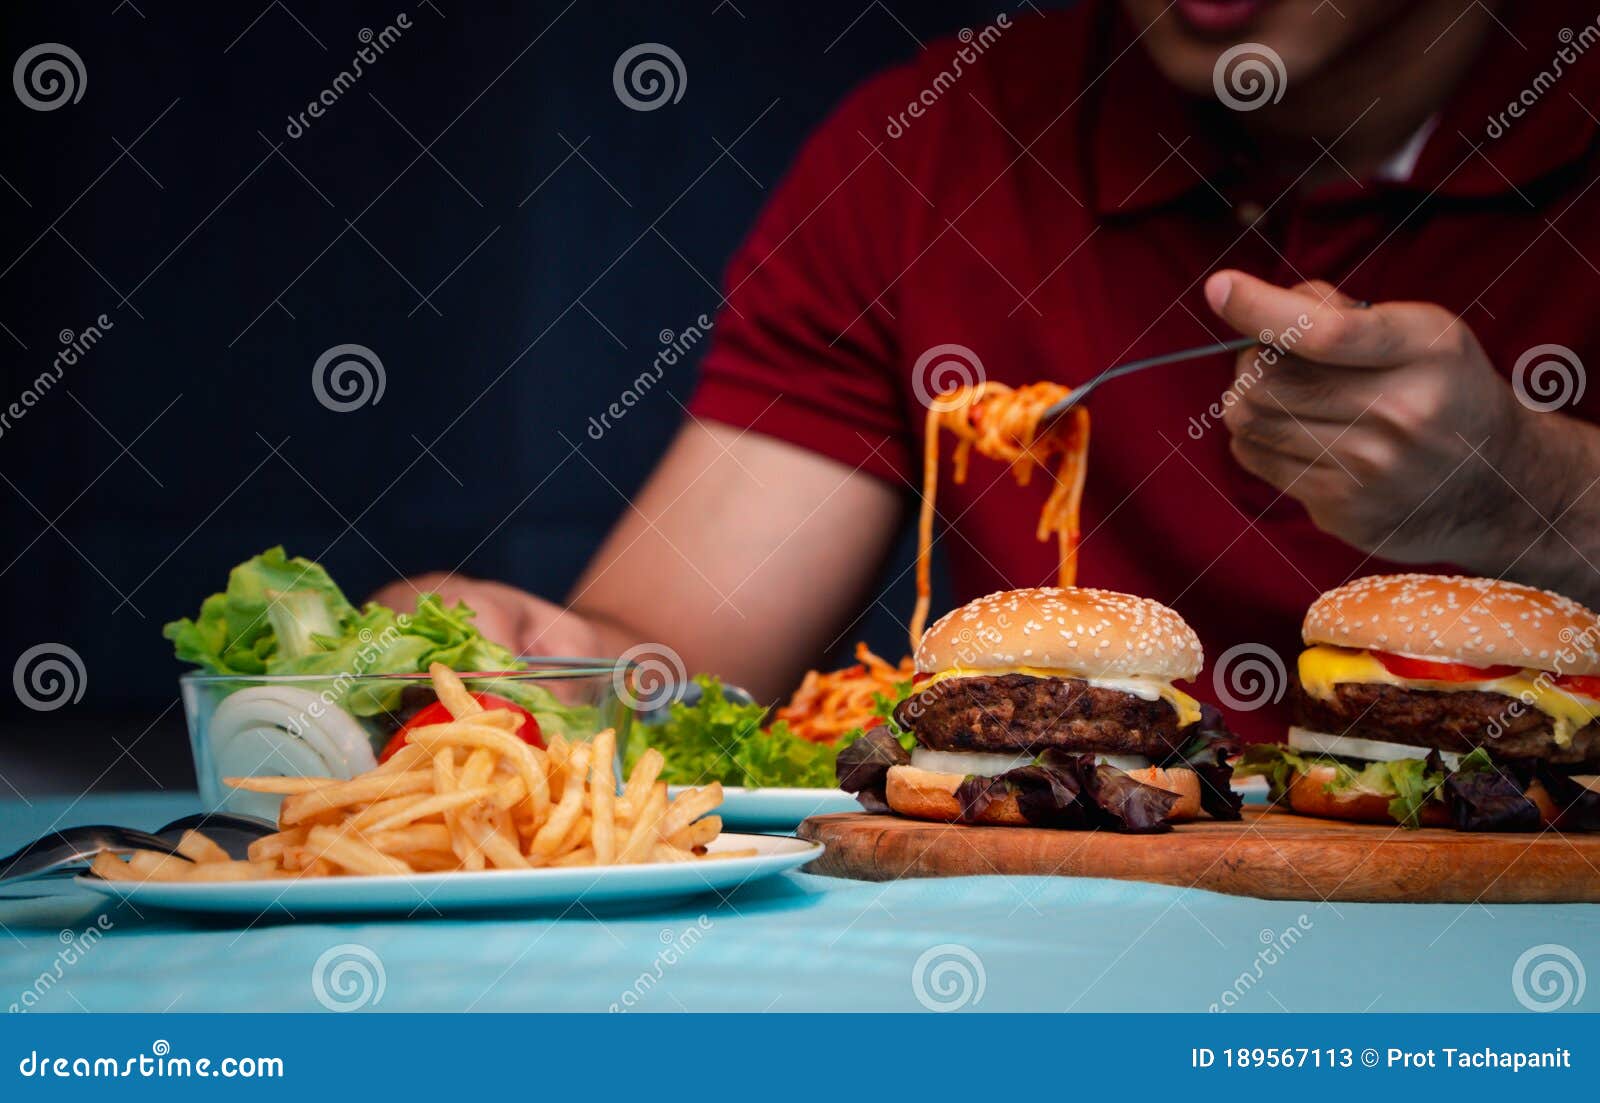 man holding hamburger on the wooden plate after delivery man delivers foods at home. concept of binge eating disorder bed and